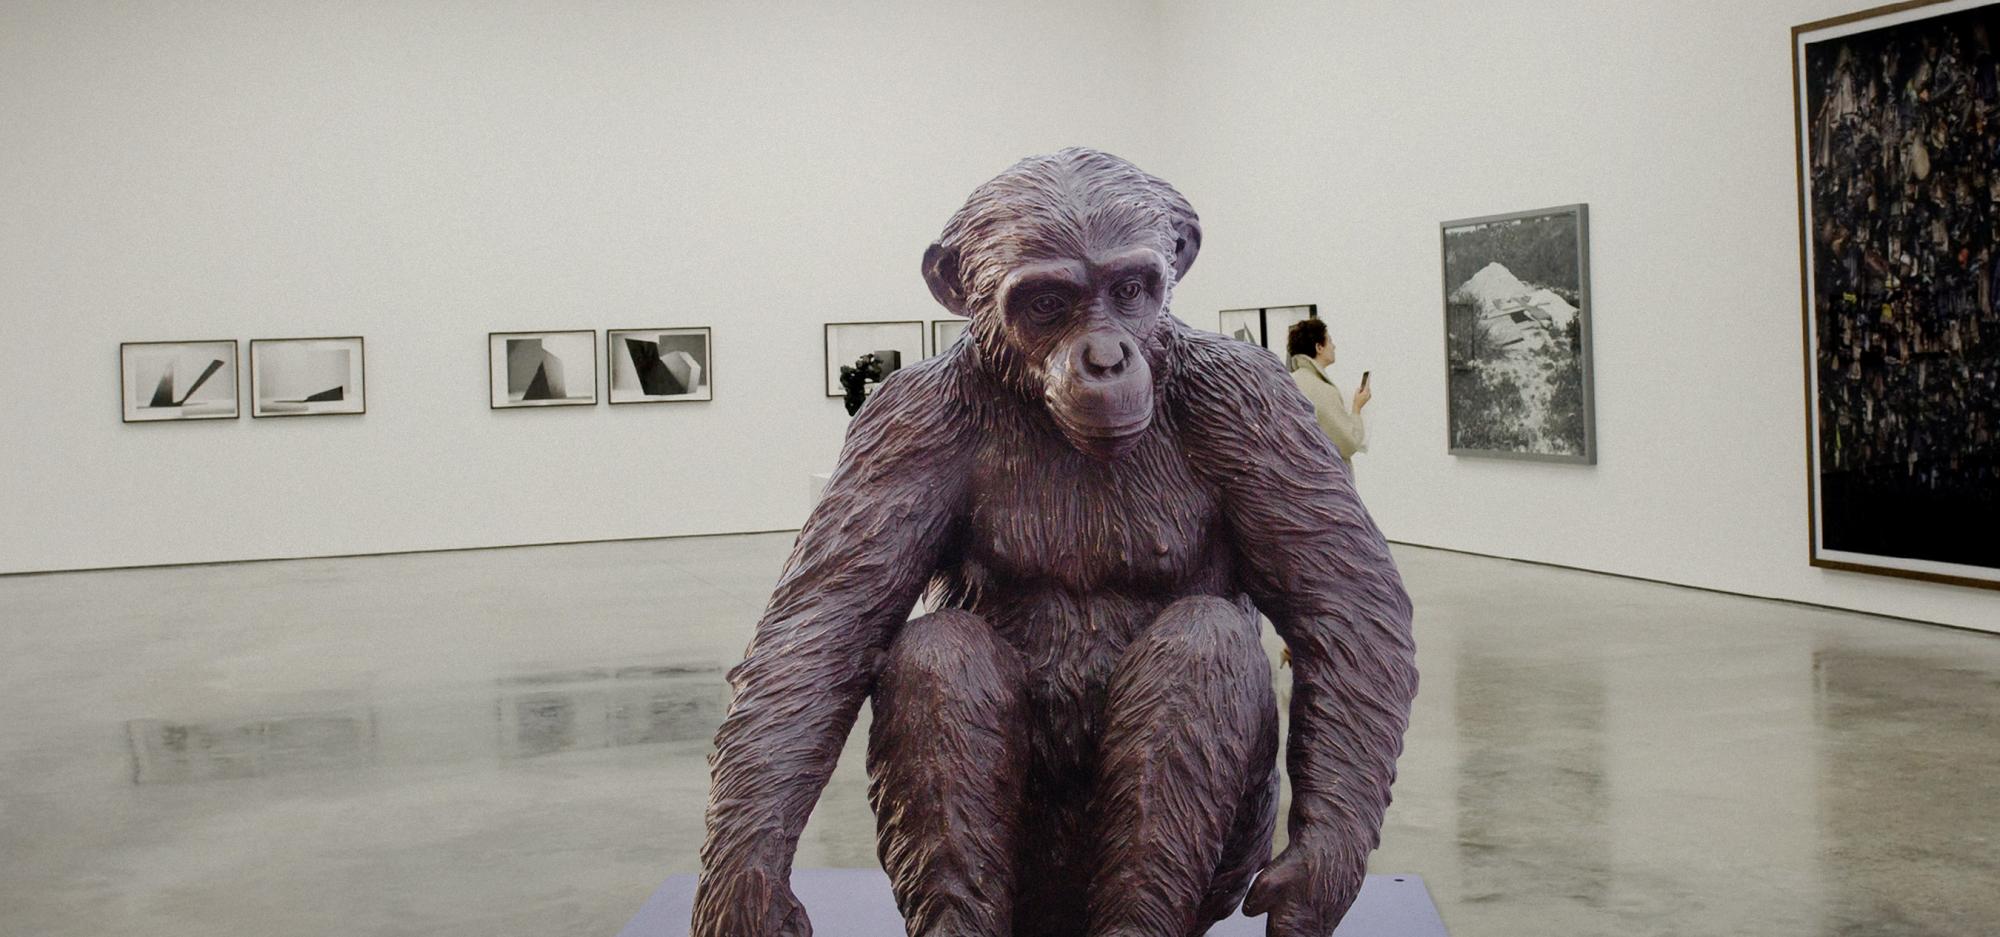 Wild Baby Chimpanzee statue in a gallery setting